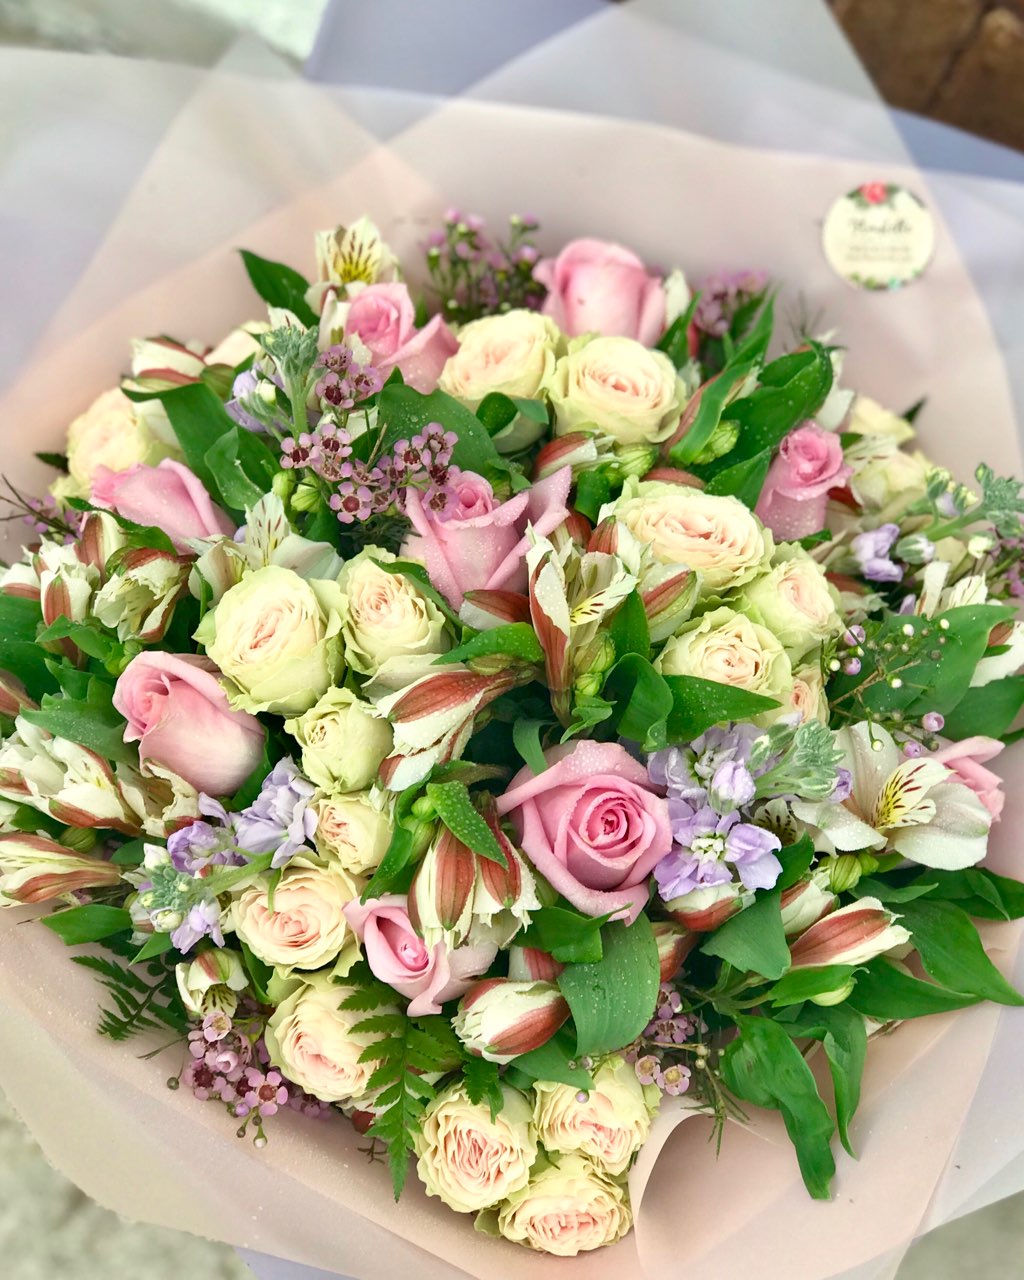 It's beauty-full!  This delightful pink arrangement brings spring joy to that special someone.  Includes:  Pink roses, creamy mini roses, white alstroemerias, lavender stock, pink wax flowers, fern. Wrapped in a craft paper Free message card